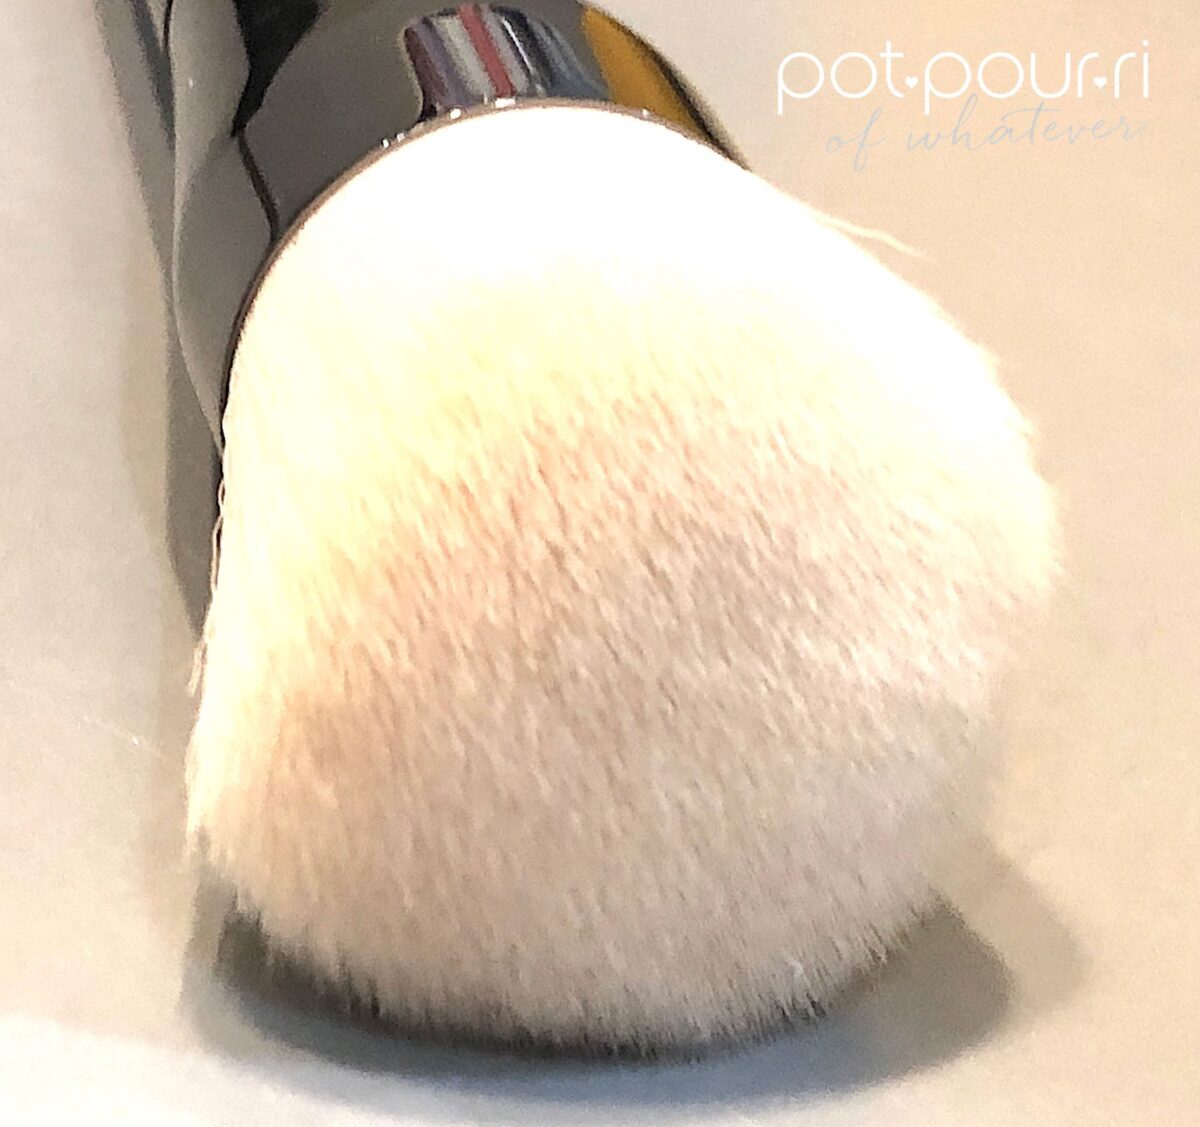 USE THE FLUFFY BRUSH TO BLEND TANTOUR INTO YOUR SKIN